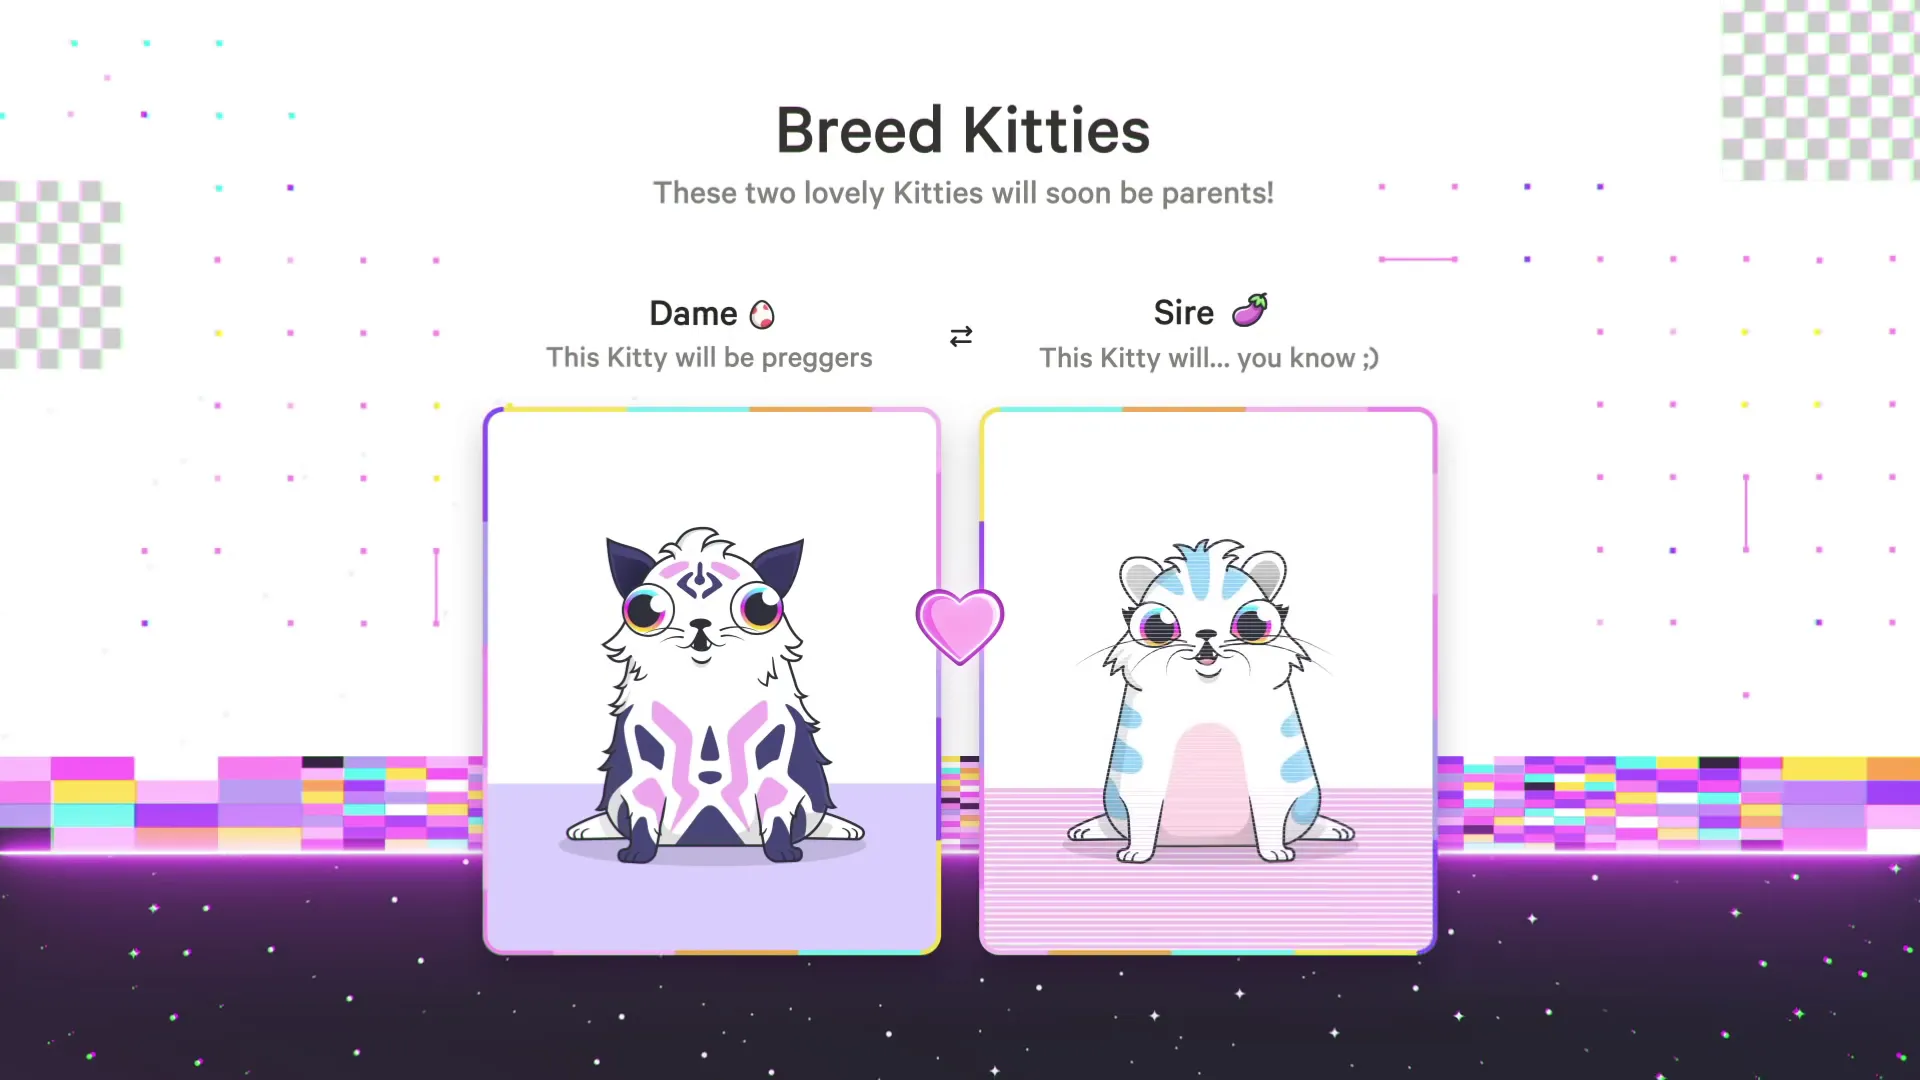 This photo from CryptoKitties illustrates the breeding process within the game, which enables the production of a new kitty in the metaverse.